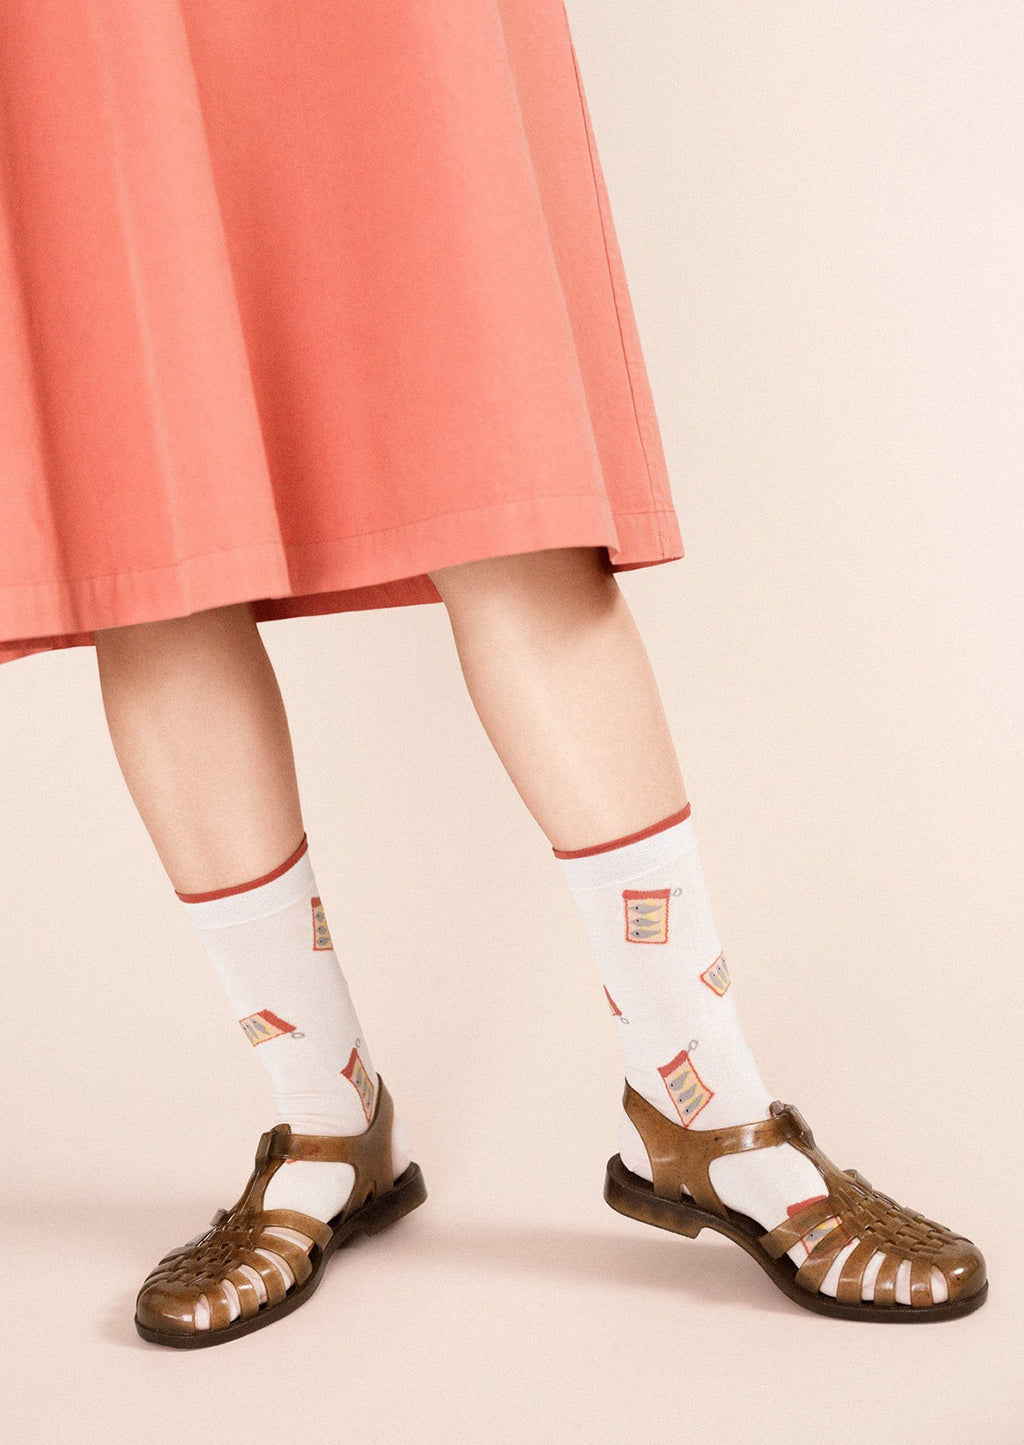 2: A pair of blush colored socks with tinned sardine pattern.